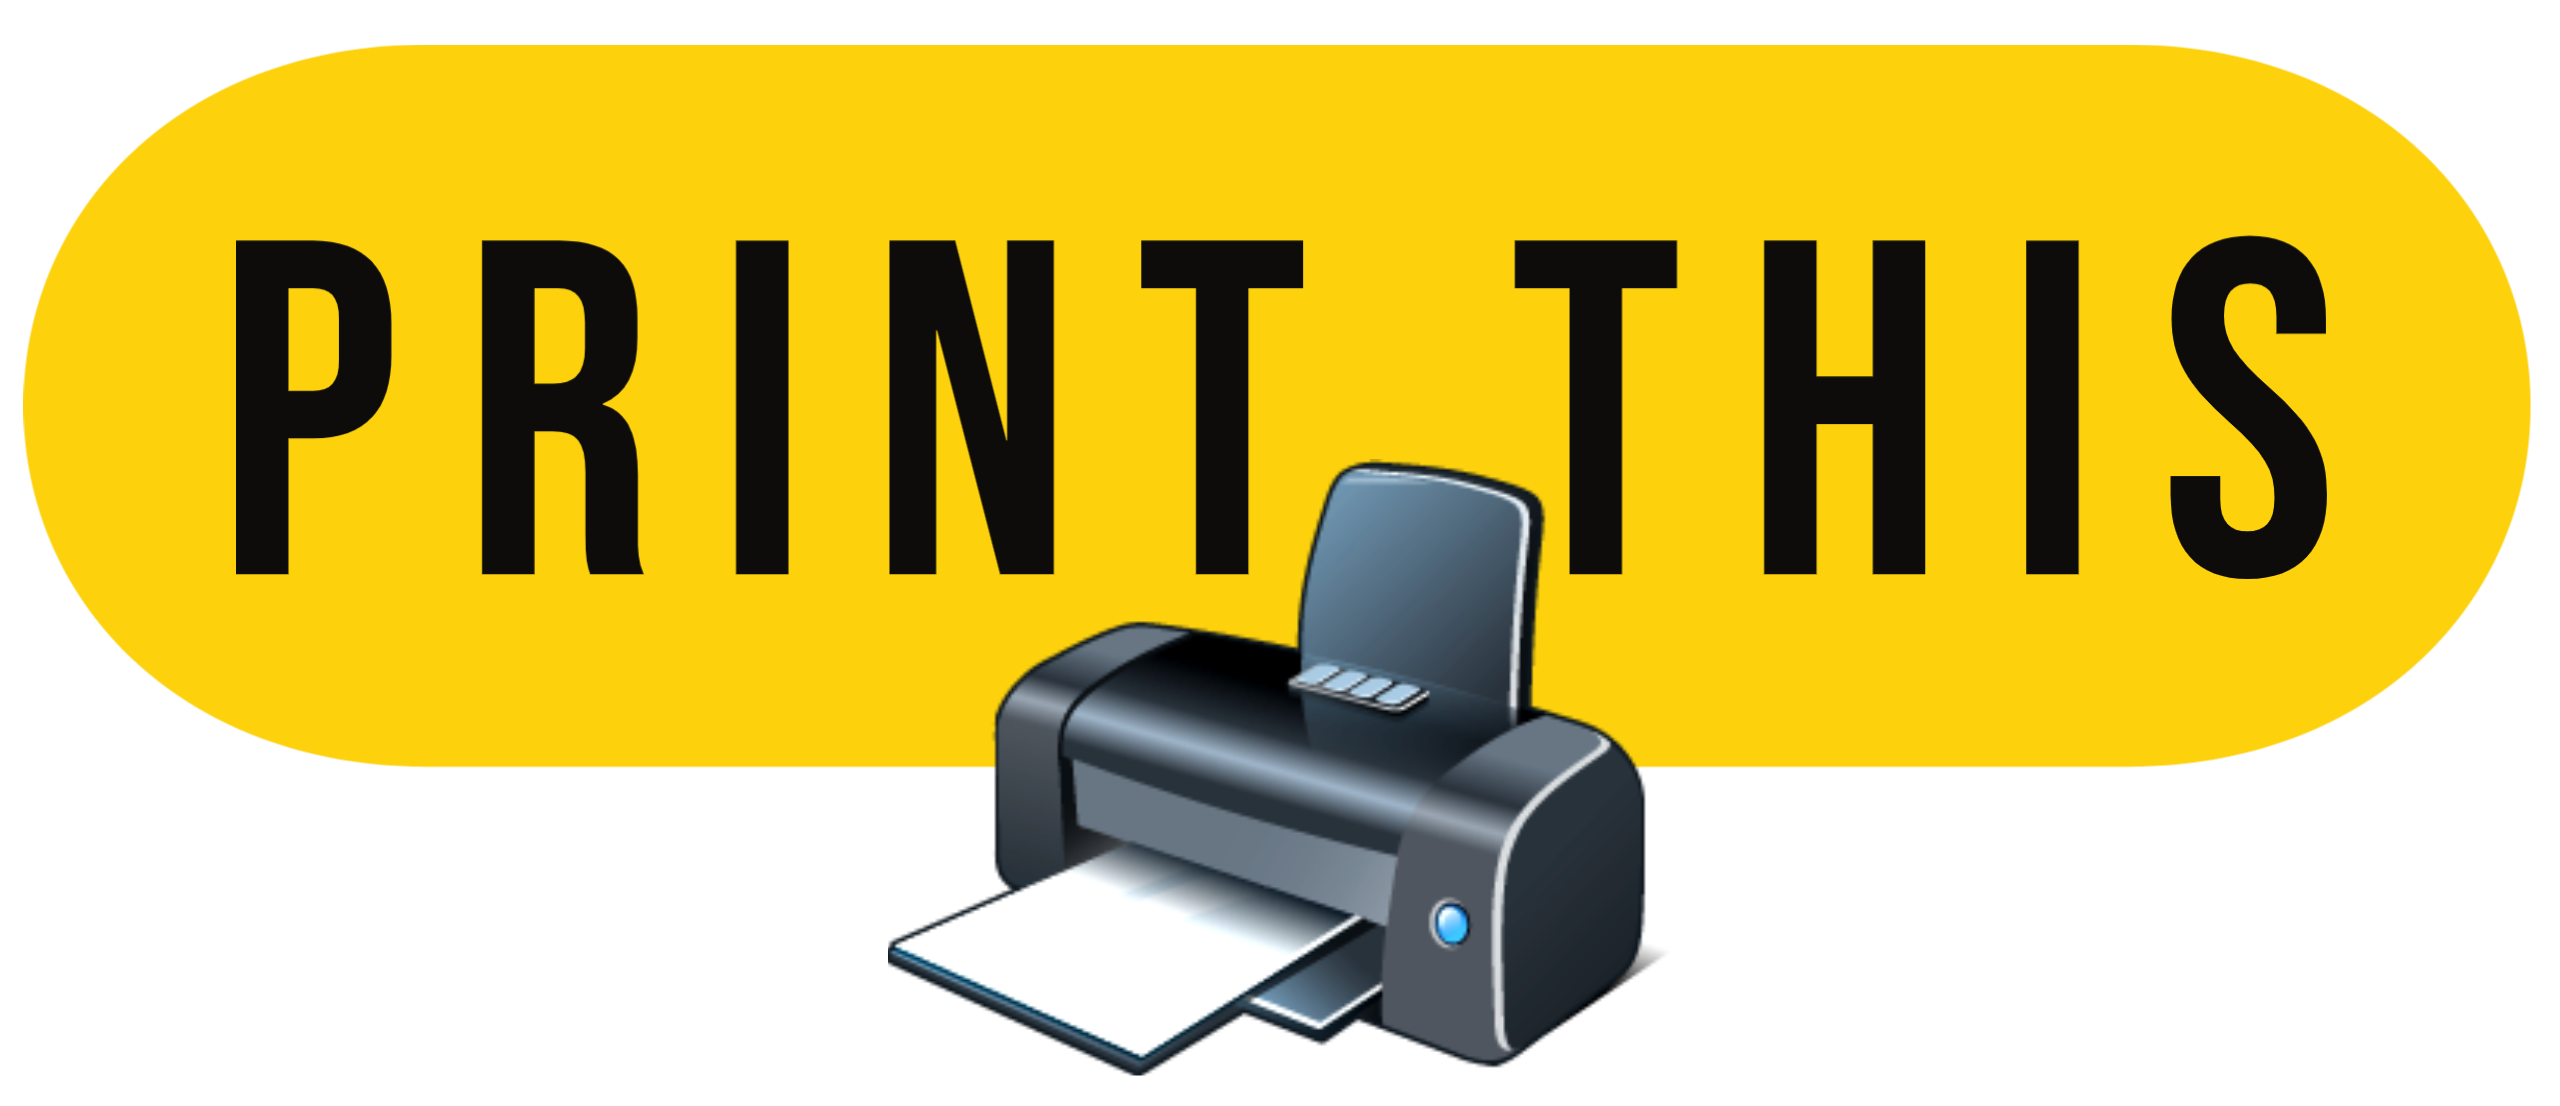 Graphic of a printer with text that says "print this!"